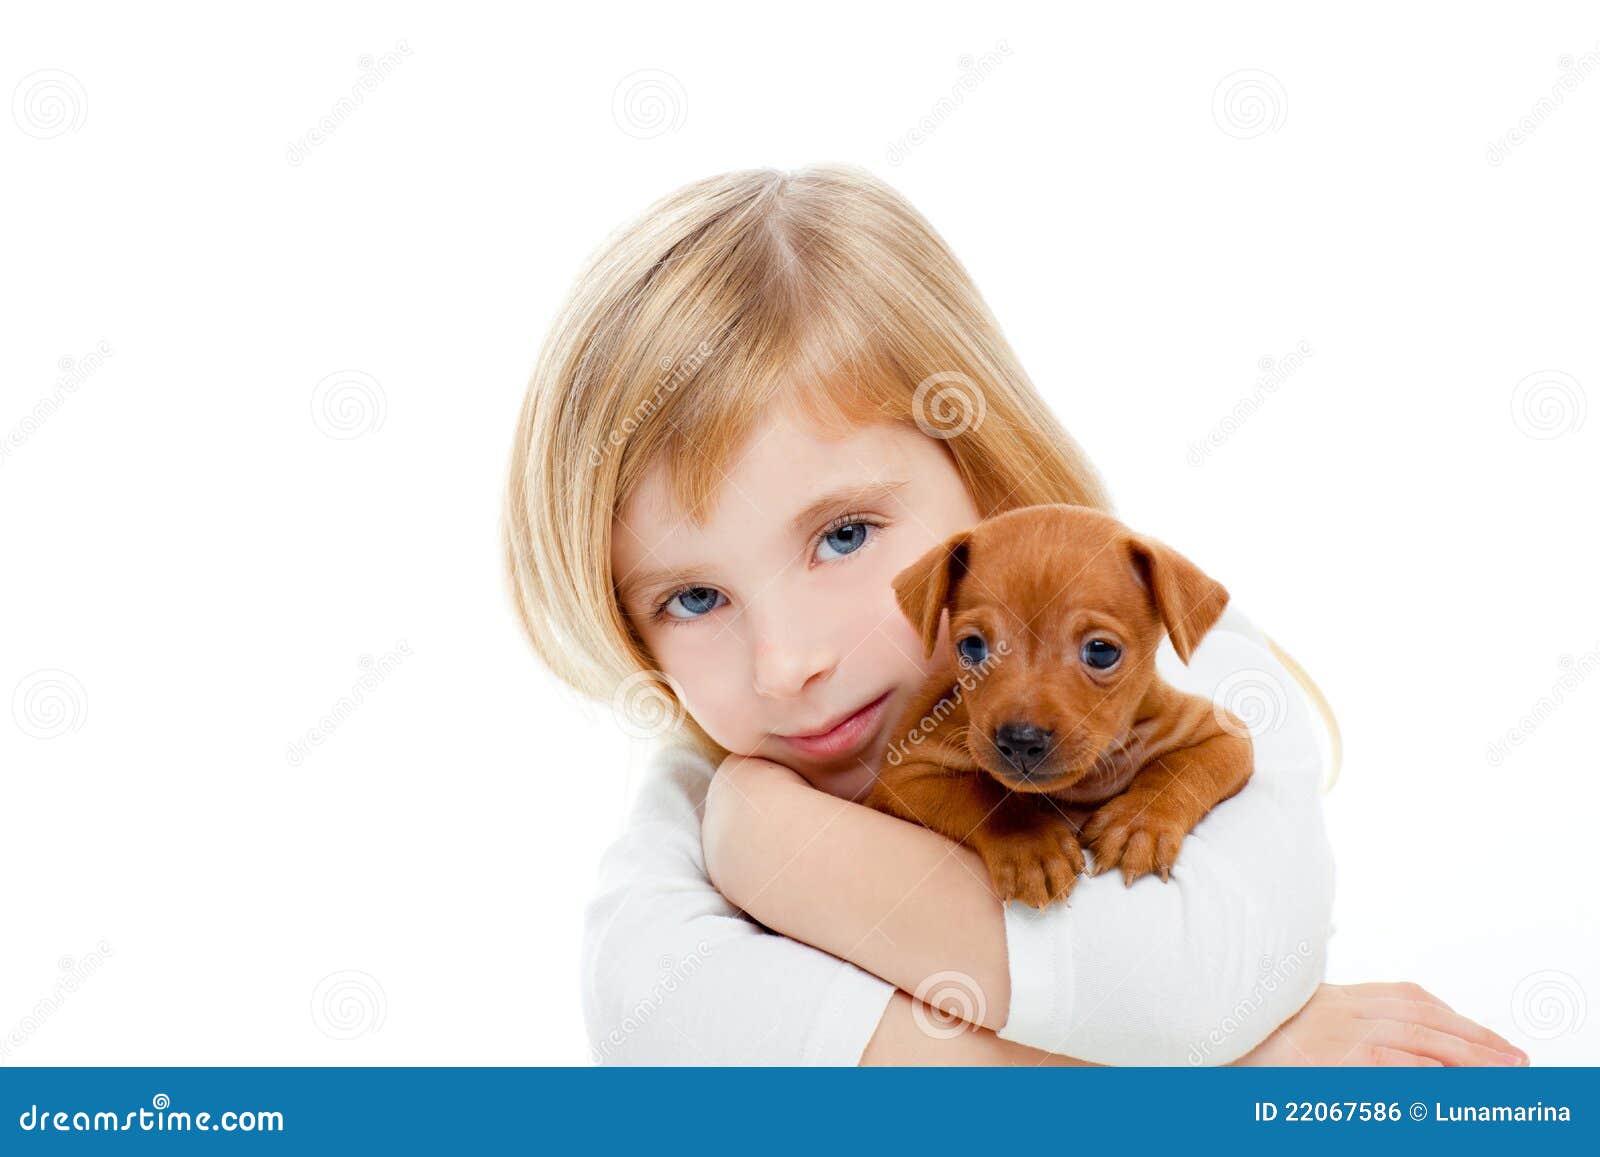 are mini pinschers good dogs for kids